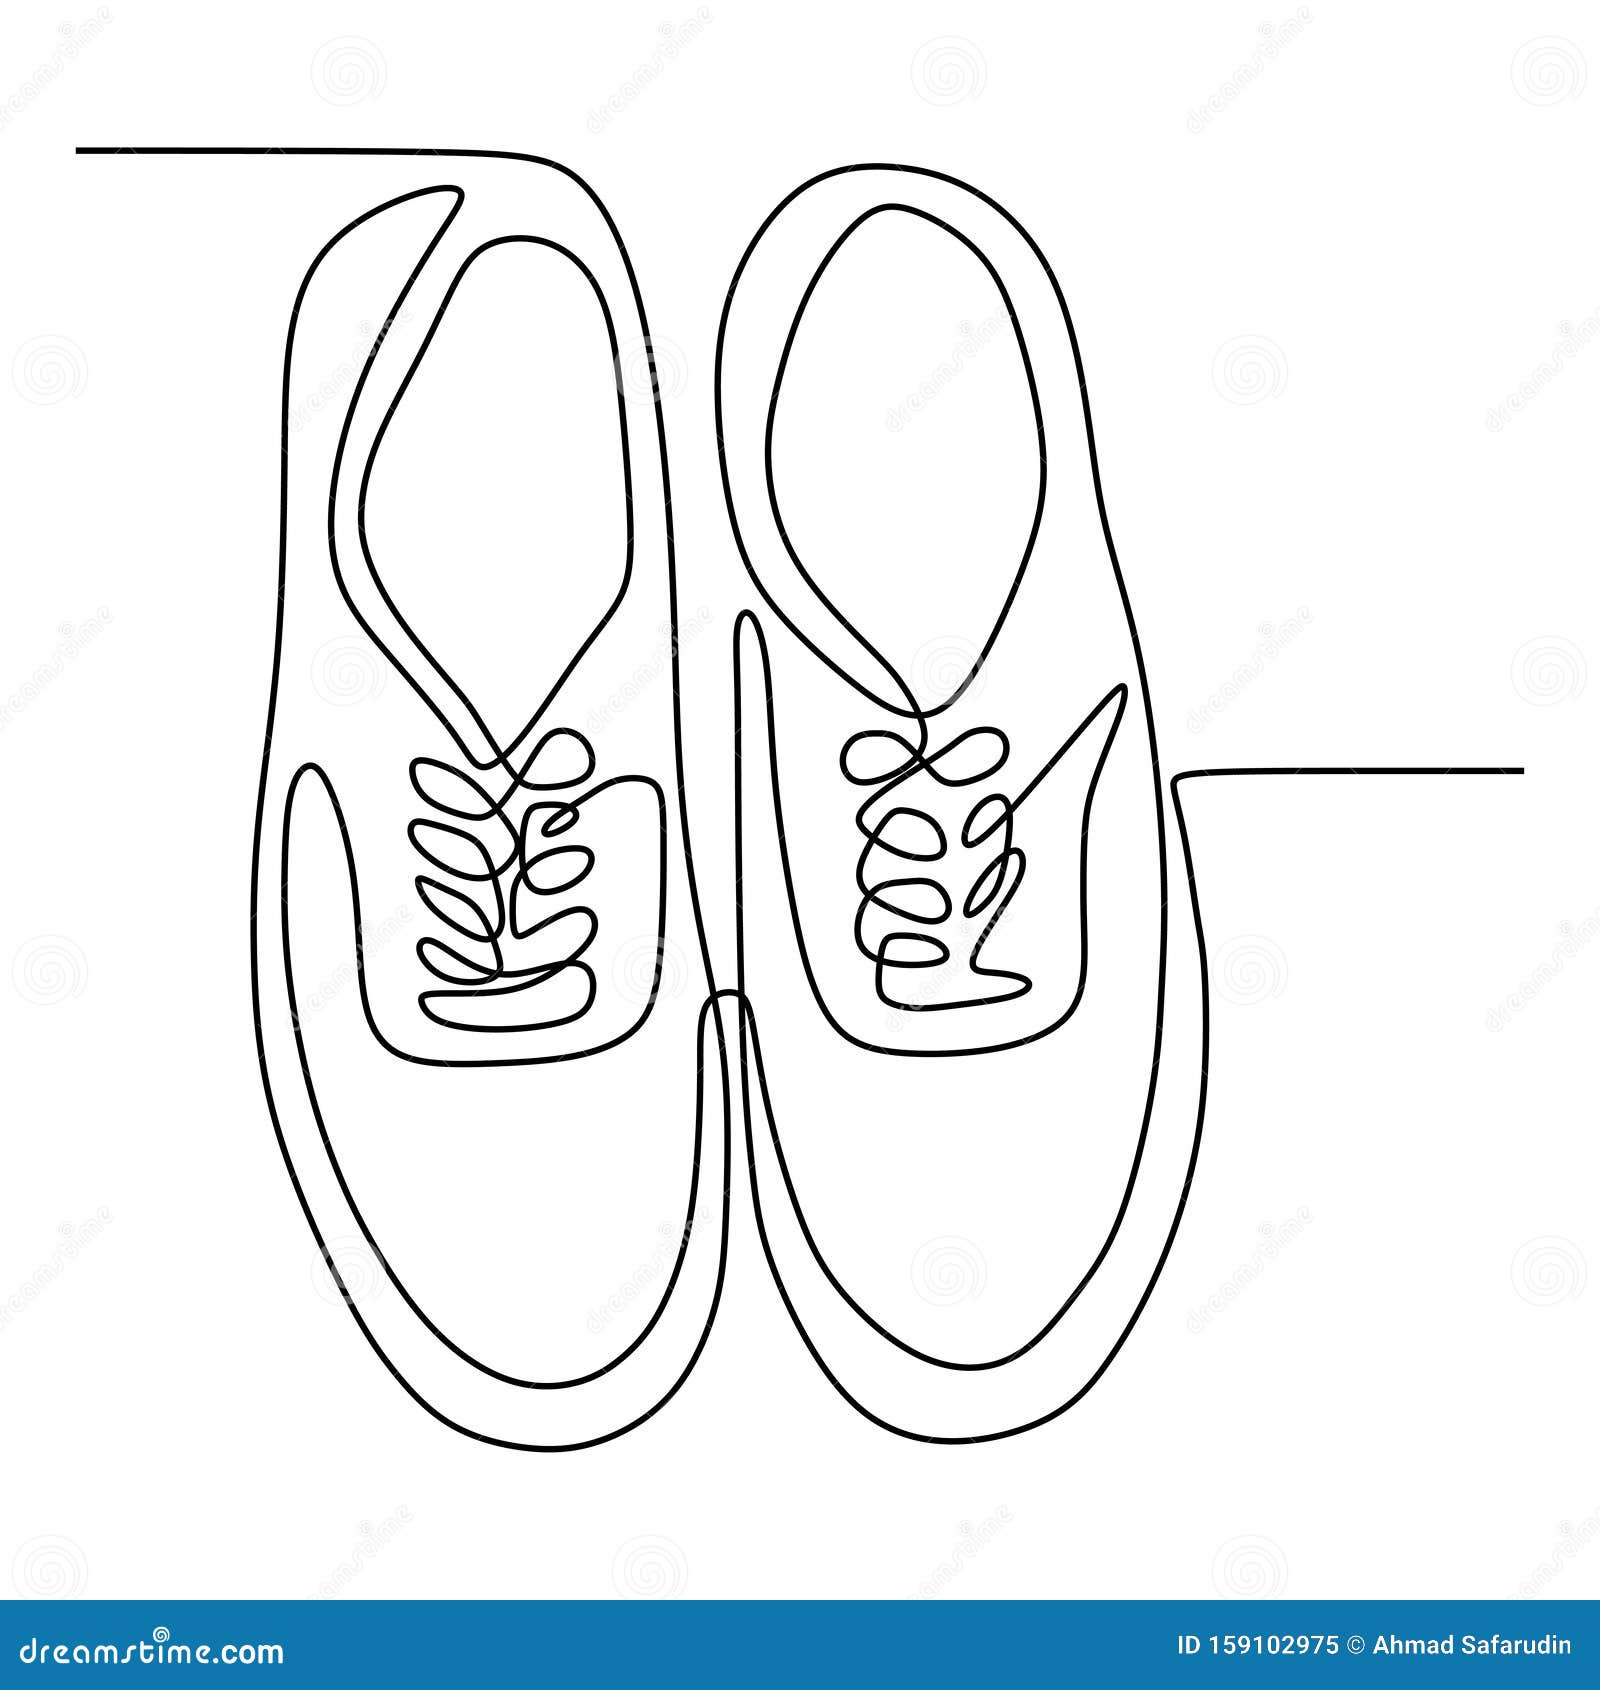 Continuous One Line Drawing Of Shoes Minimalist Design